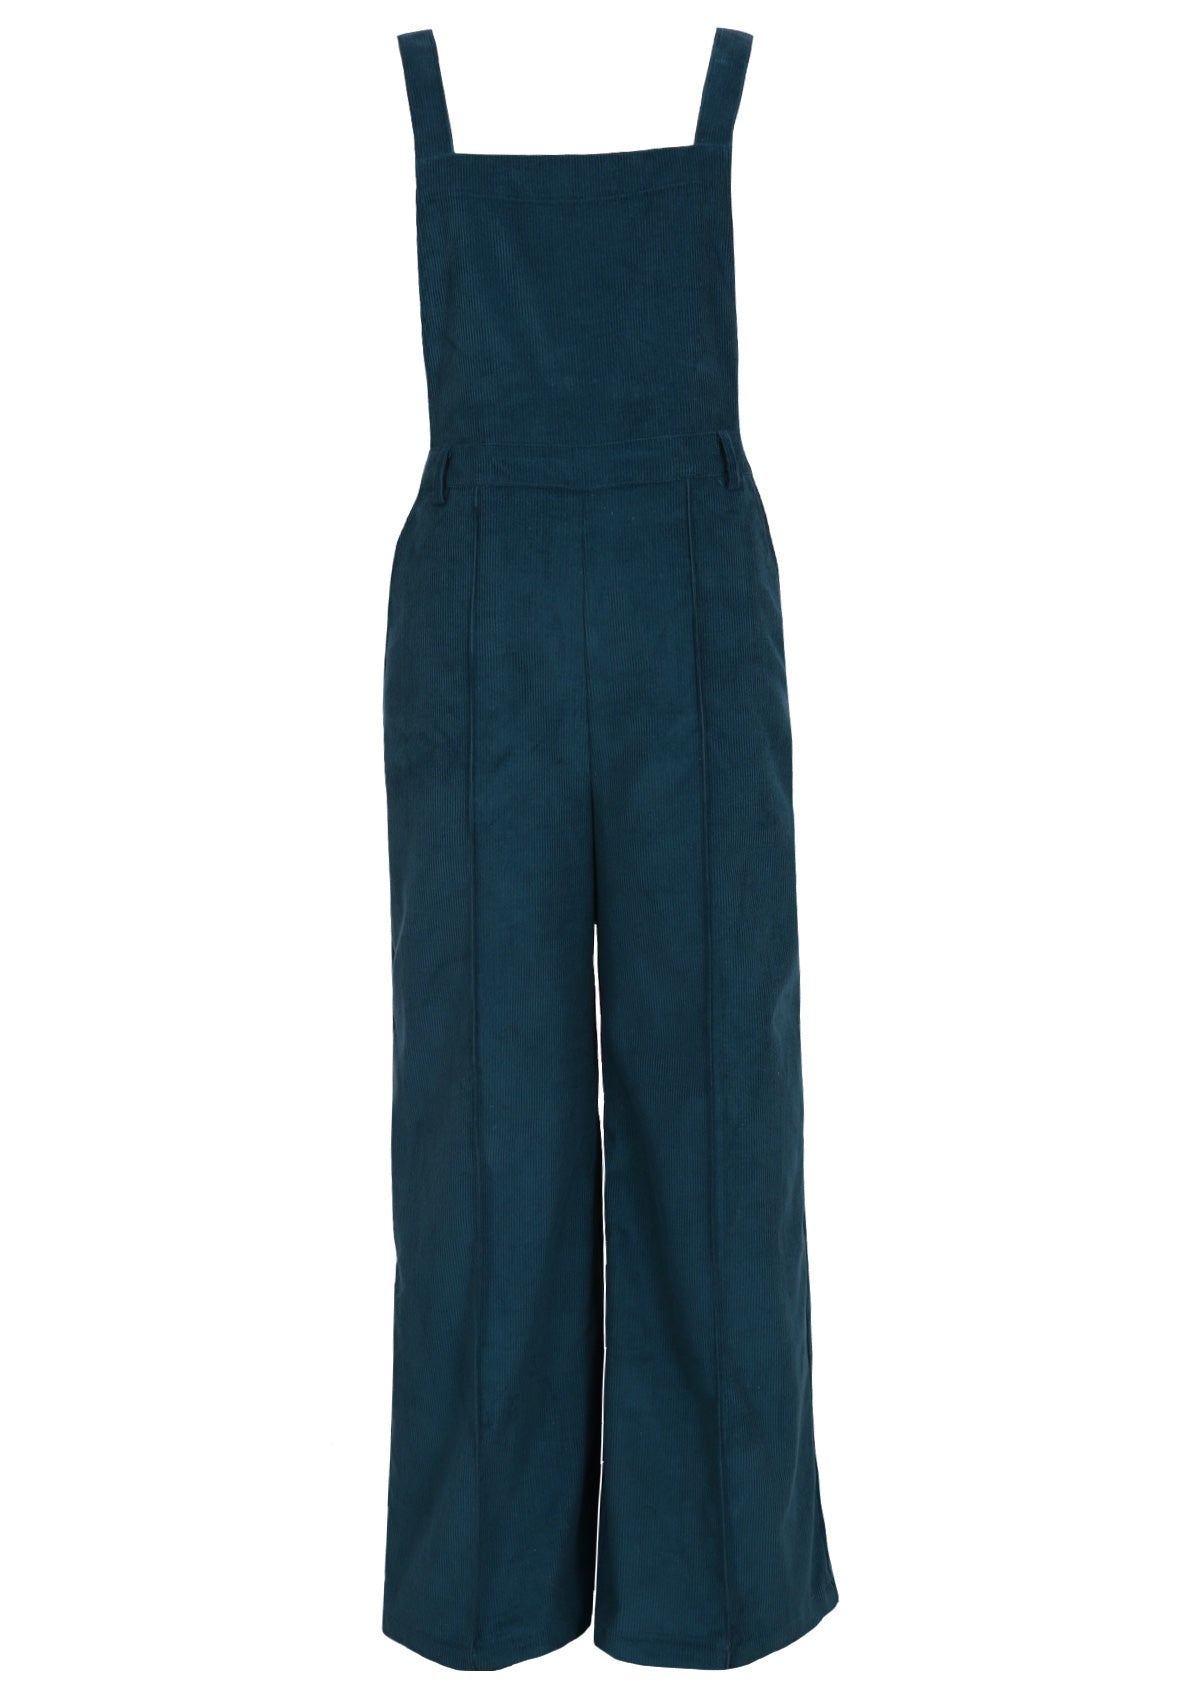 Deep teal overalls in 100% cotton corduroy features side pockets. 